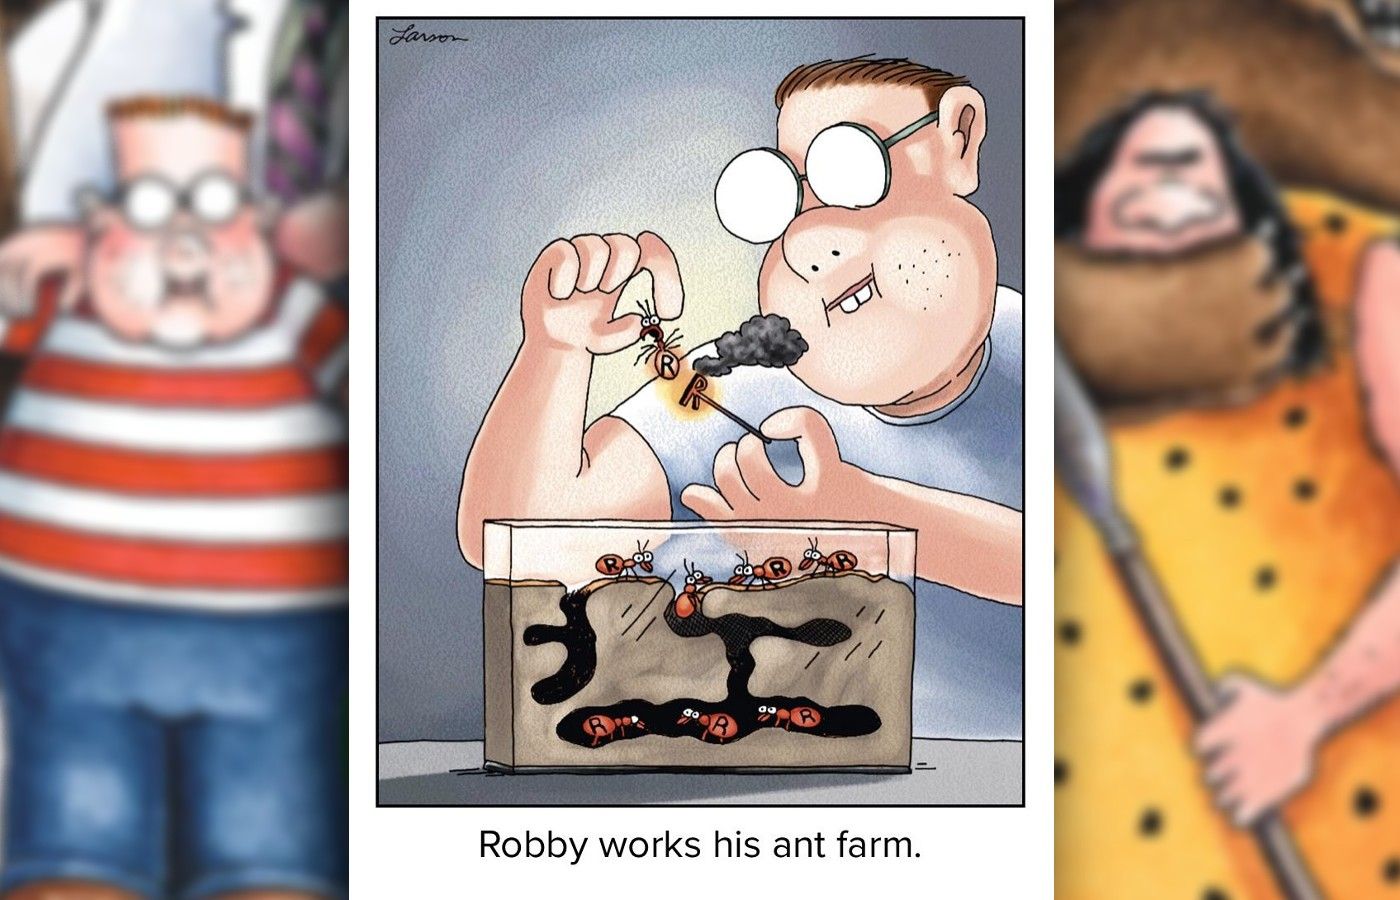 far side comic about a kid who brands the bugs in his ant farm